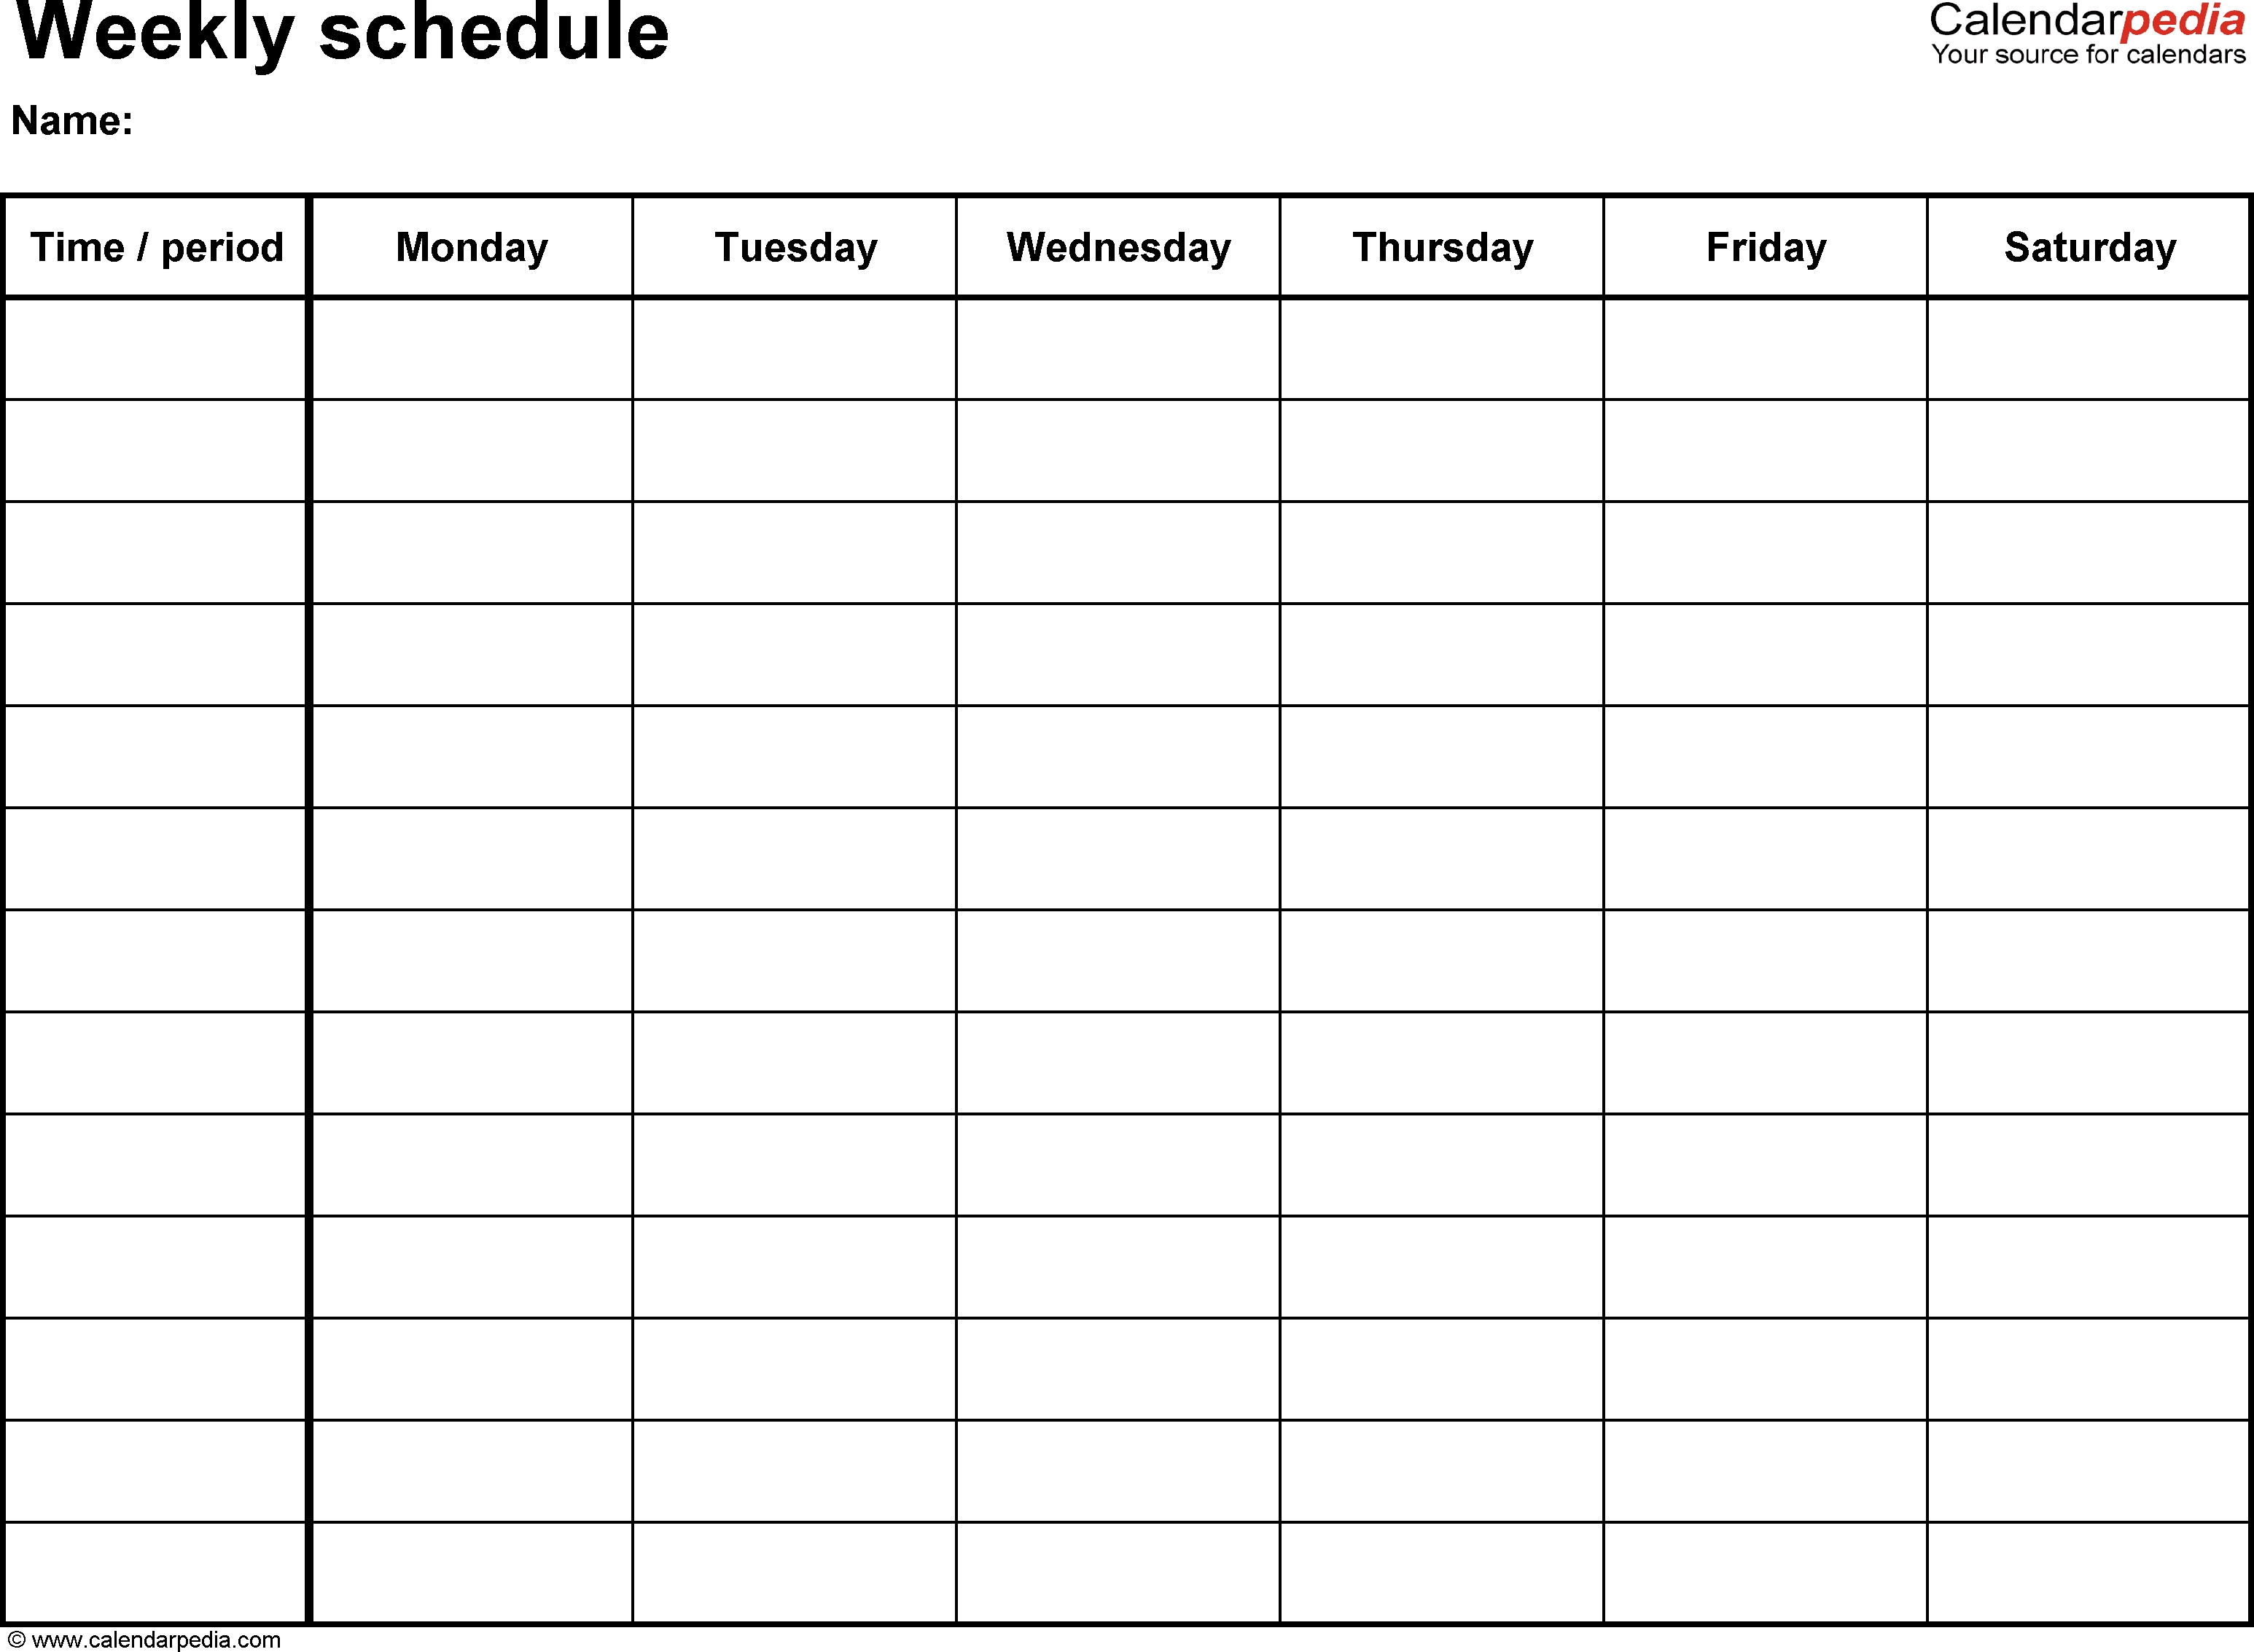 Free Weekly Schedule Templates For Word - 18 Templates-Monday To Friday Blank Calendar Printable